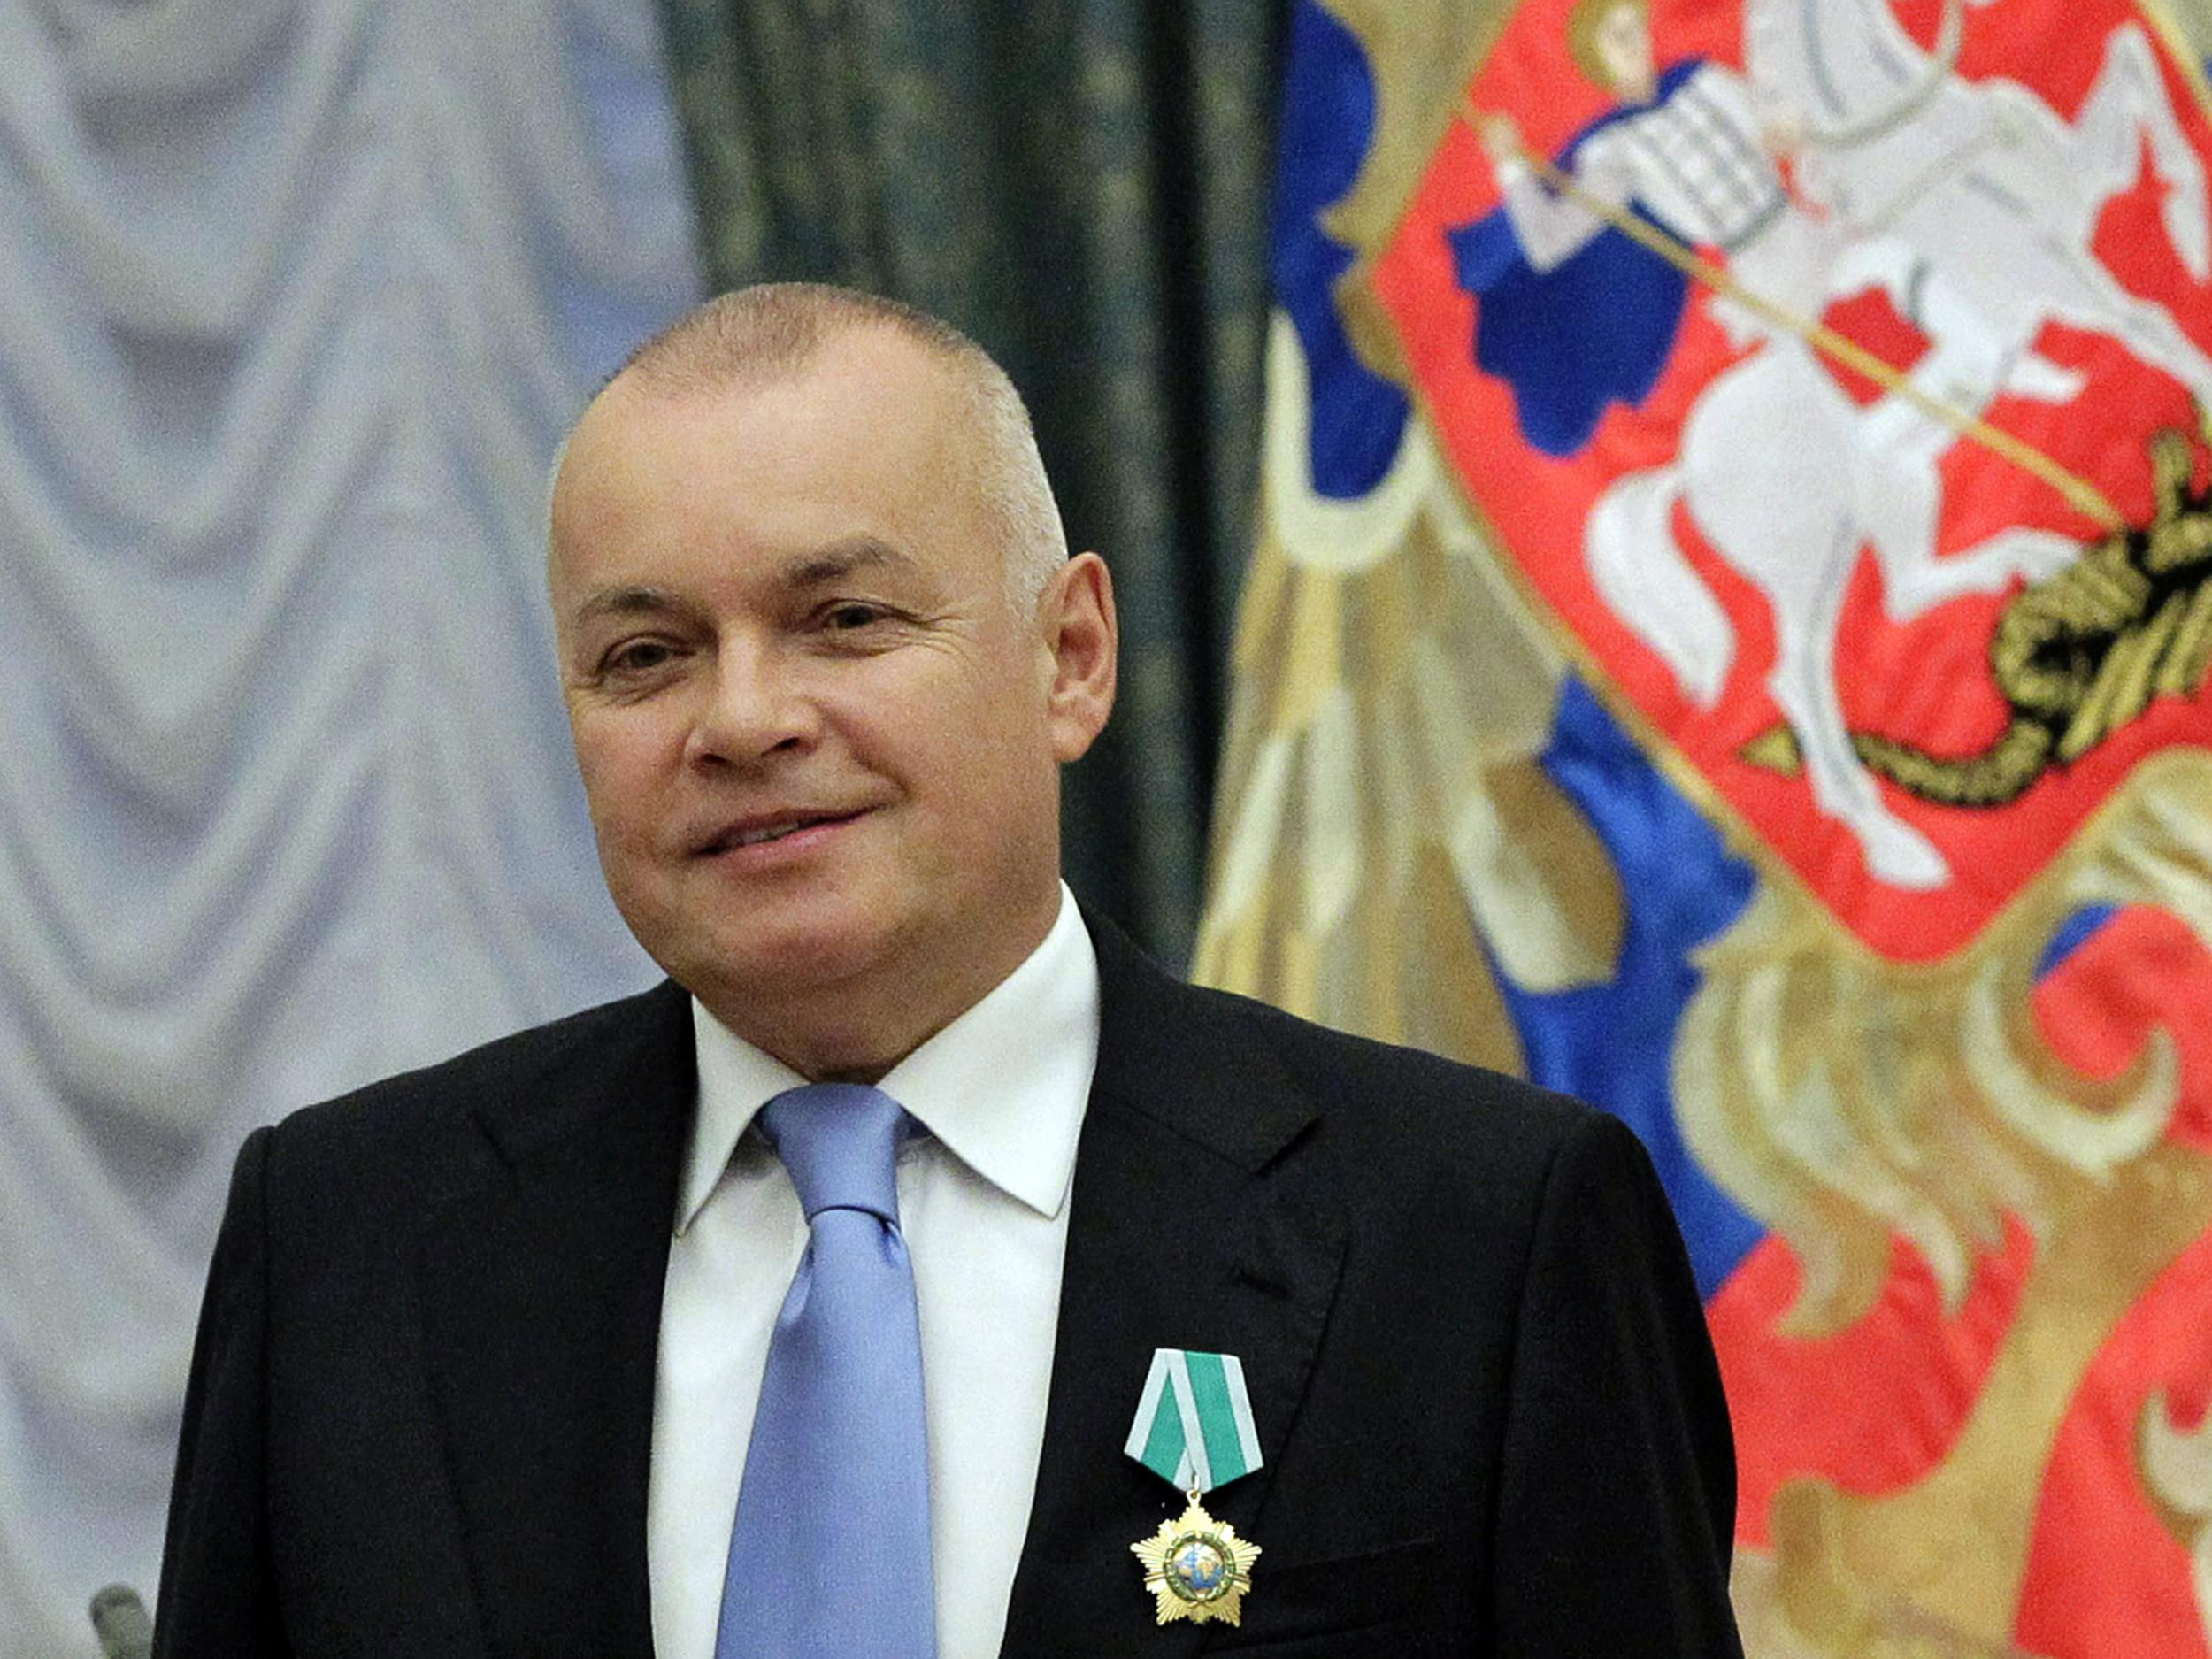 Russian television journalist Dmitry Kiselyov posing for a photo after receiving a medal of Friendship during an awarding ceremony in the Kremlin in Moscow